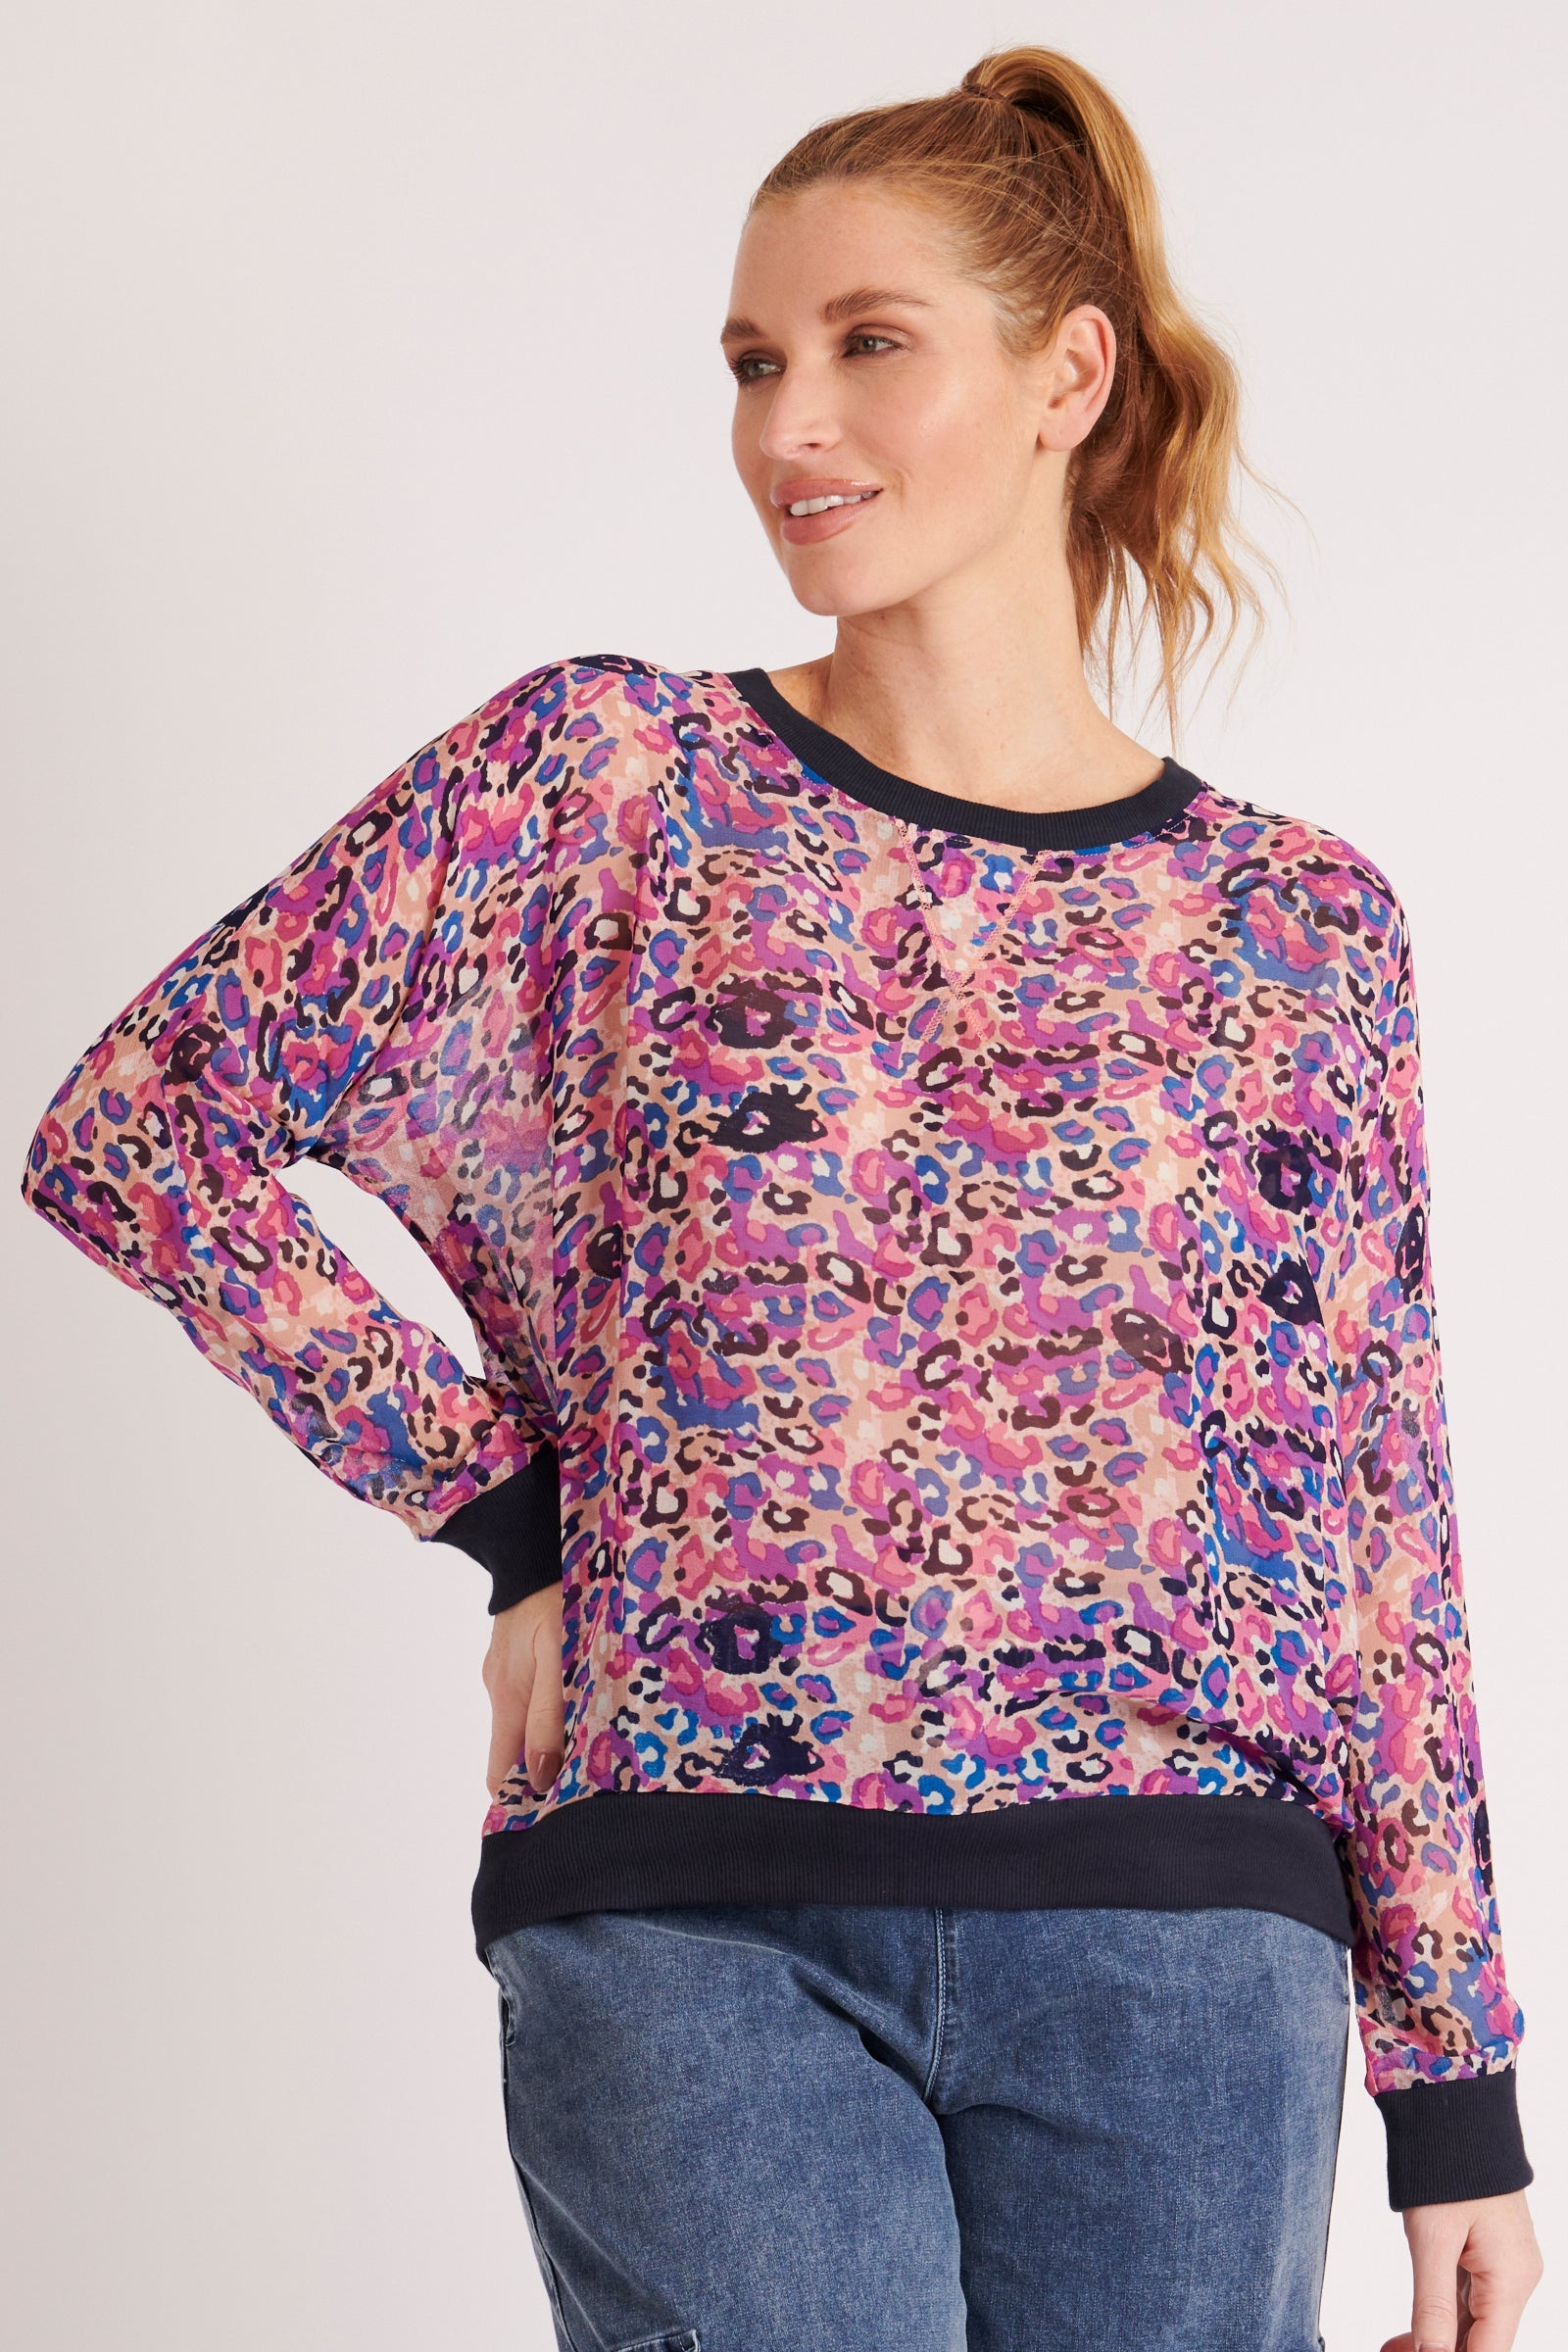 Contrast Band Popover - Pink Leopard-Knitwear & Jumpers-A Little Birdie Told Me-The Bay Room